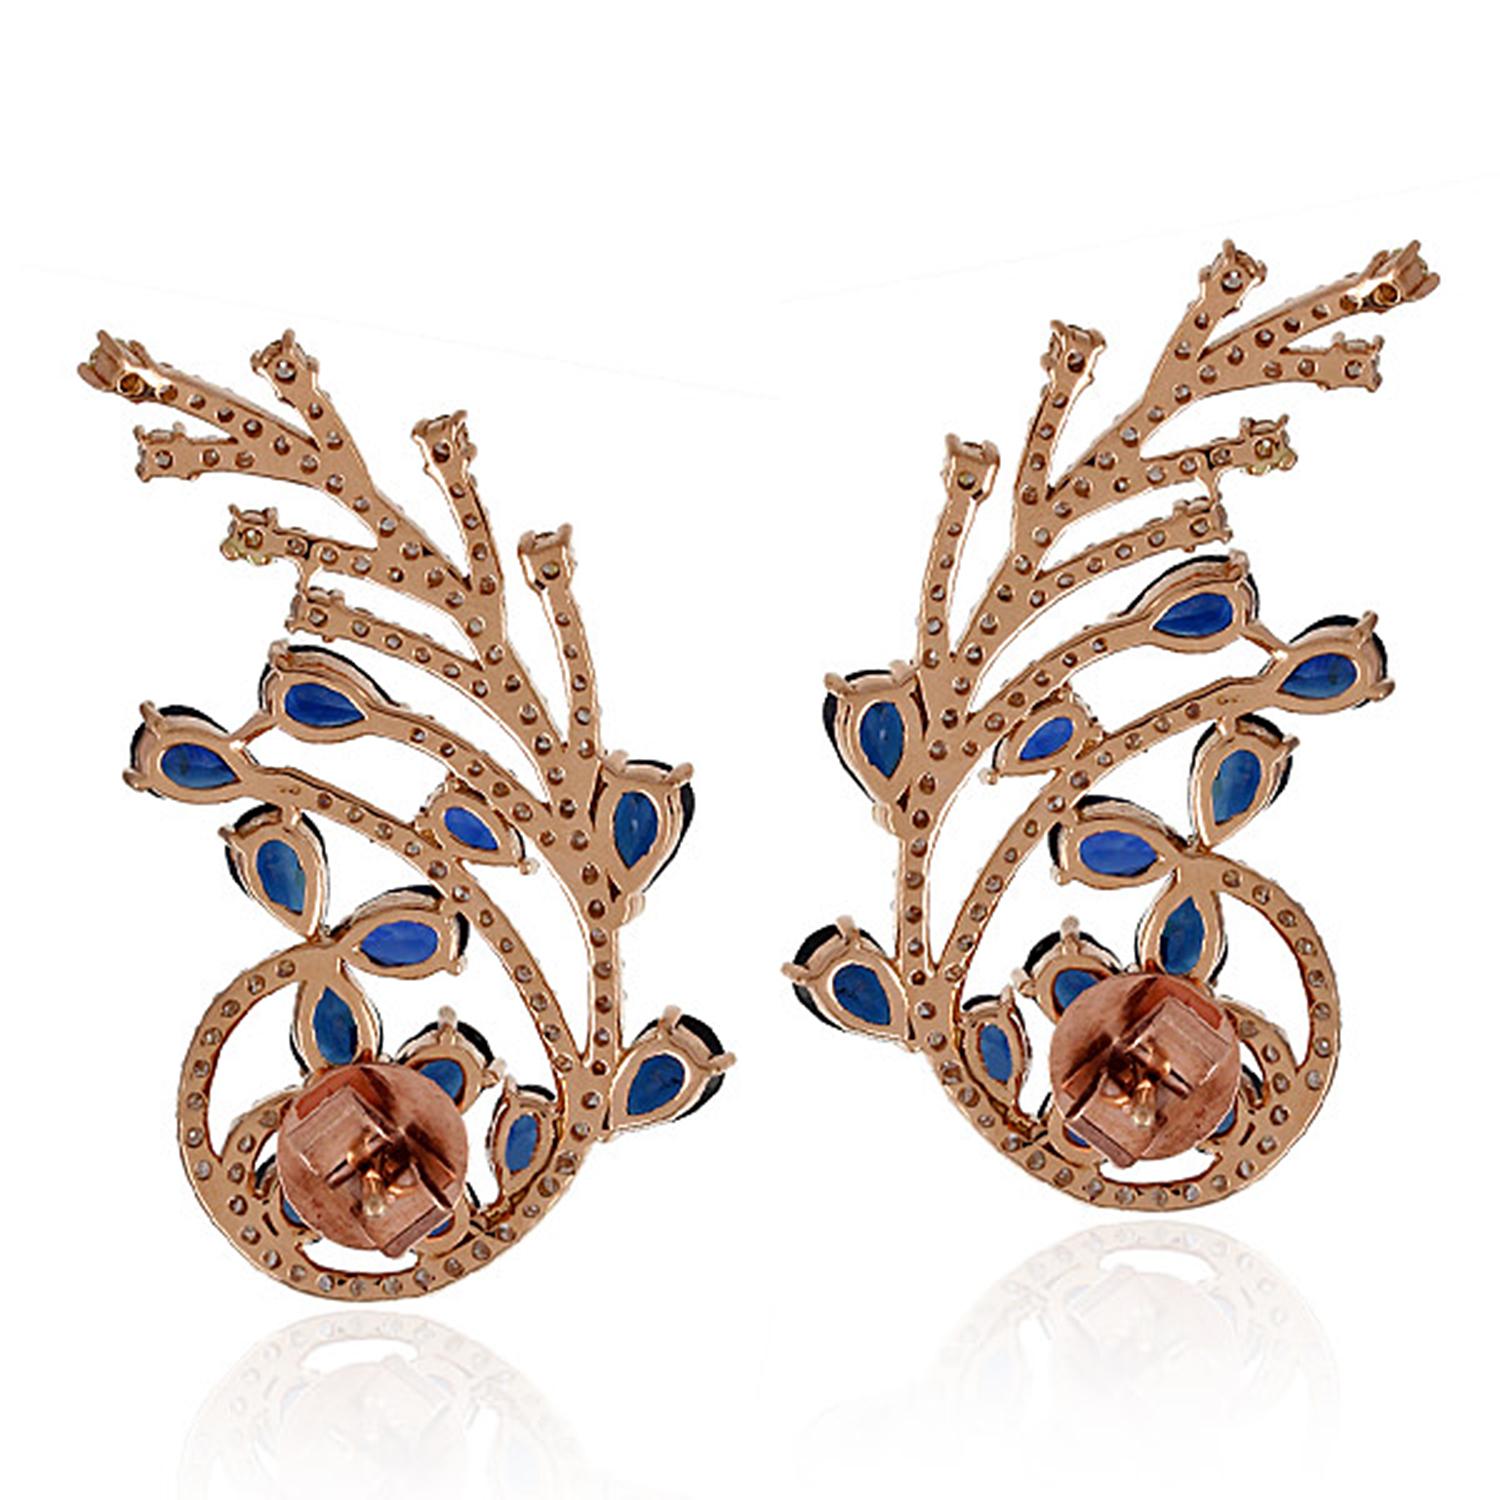 These ear climbers are handmade in 18-karat gold and beautifully detailed with 9.39 carats of blue sapphire & 2.26 carats of sparkling diamonds. Show off their unique style by sweeping your hair back.

FOLLOW  MEGHNA JEWELS storefront to view the